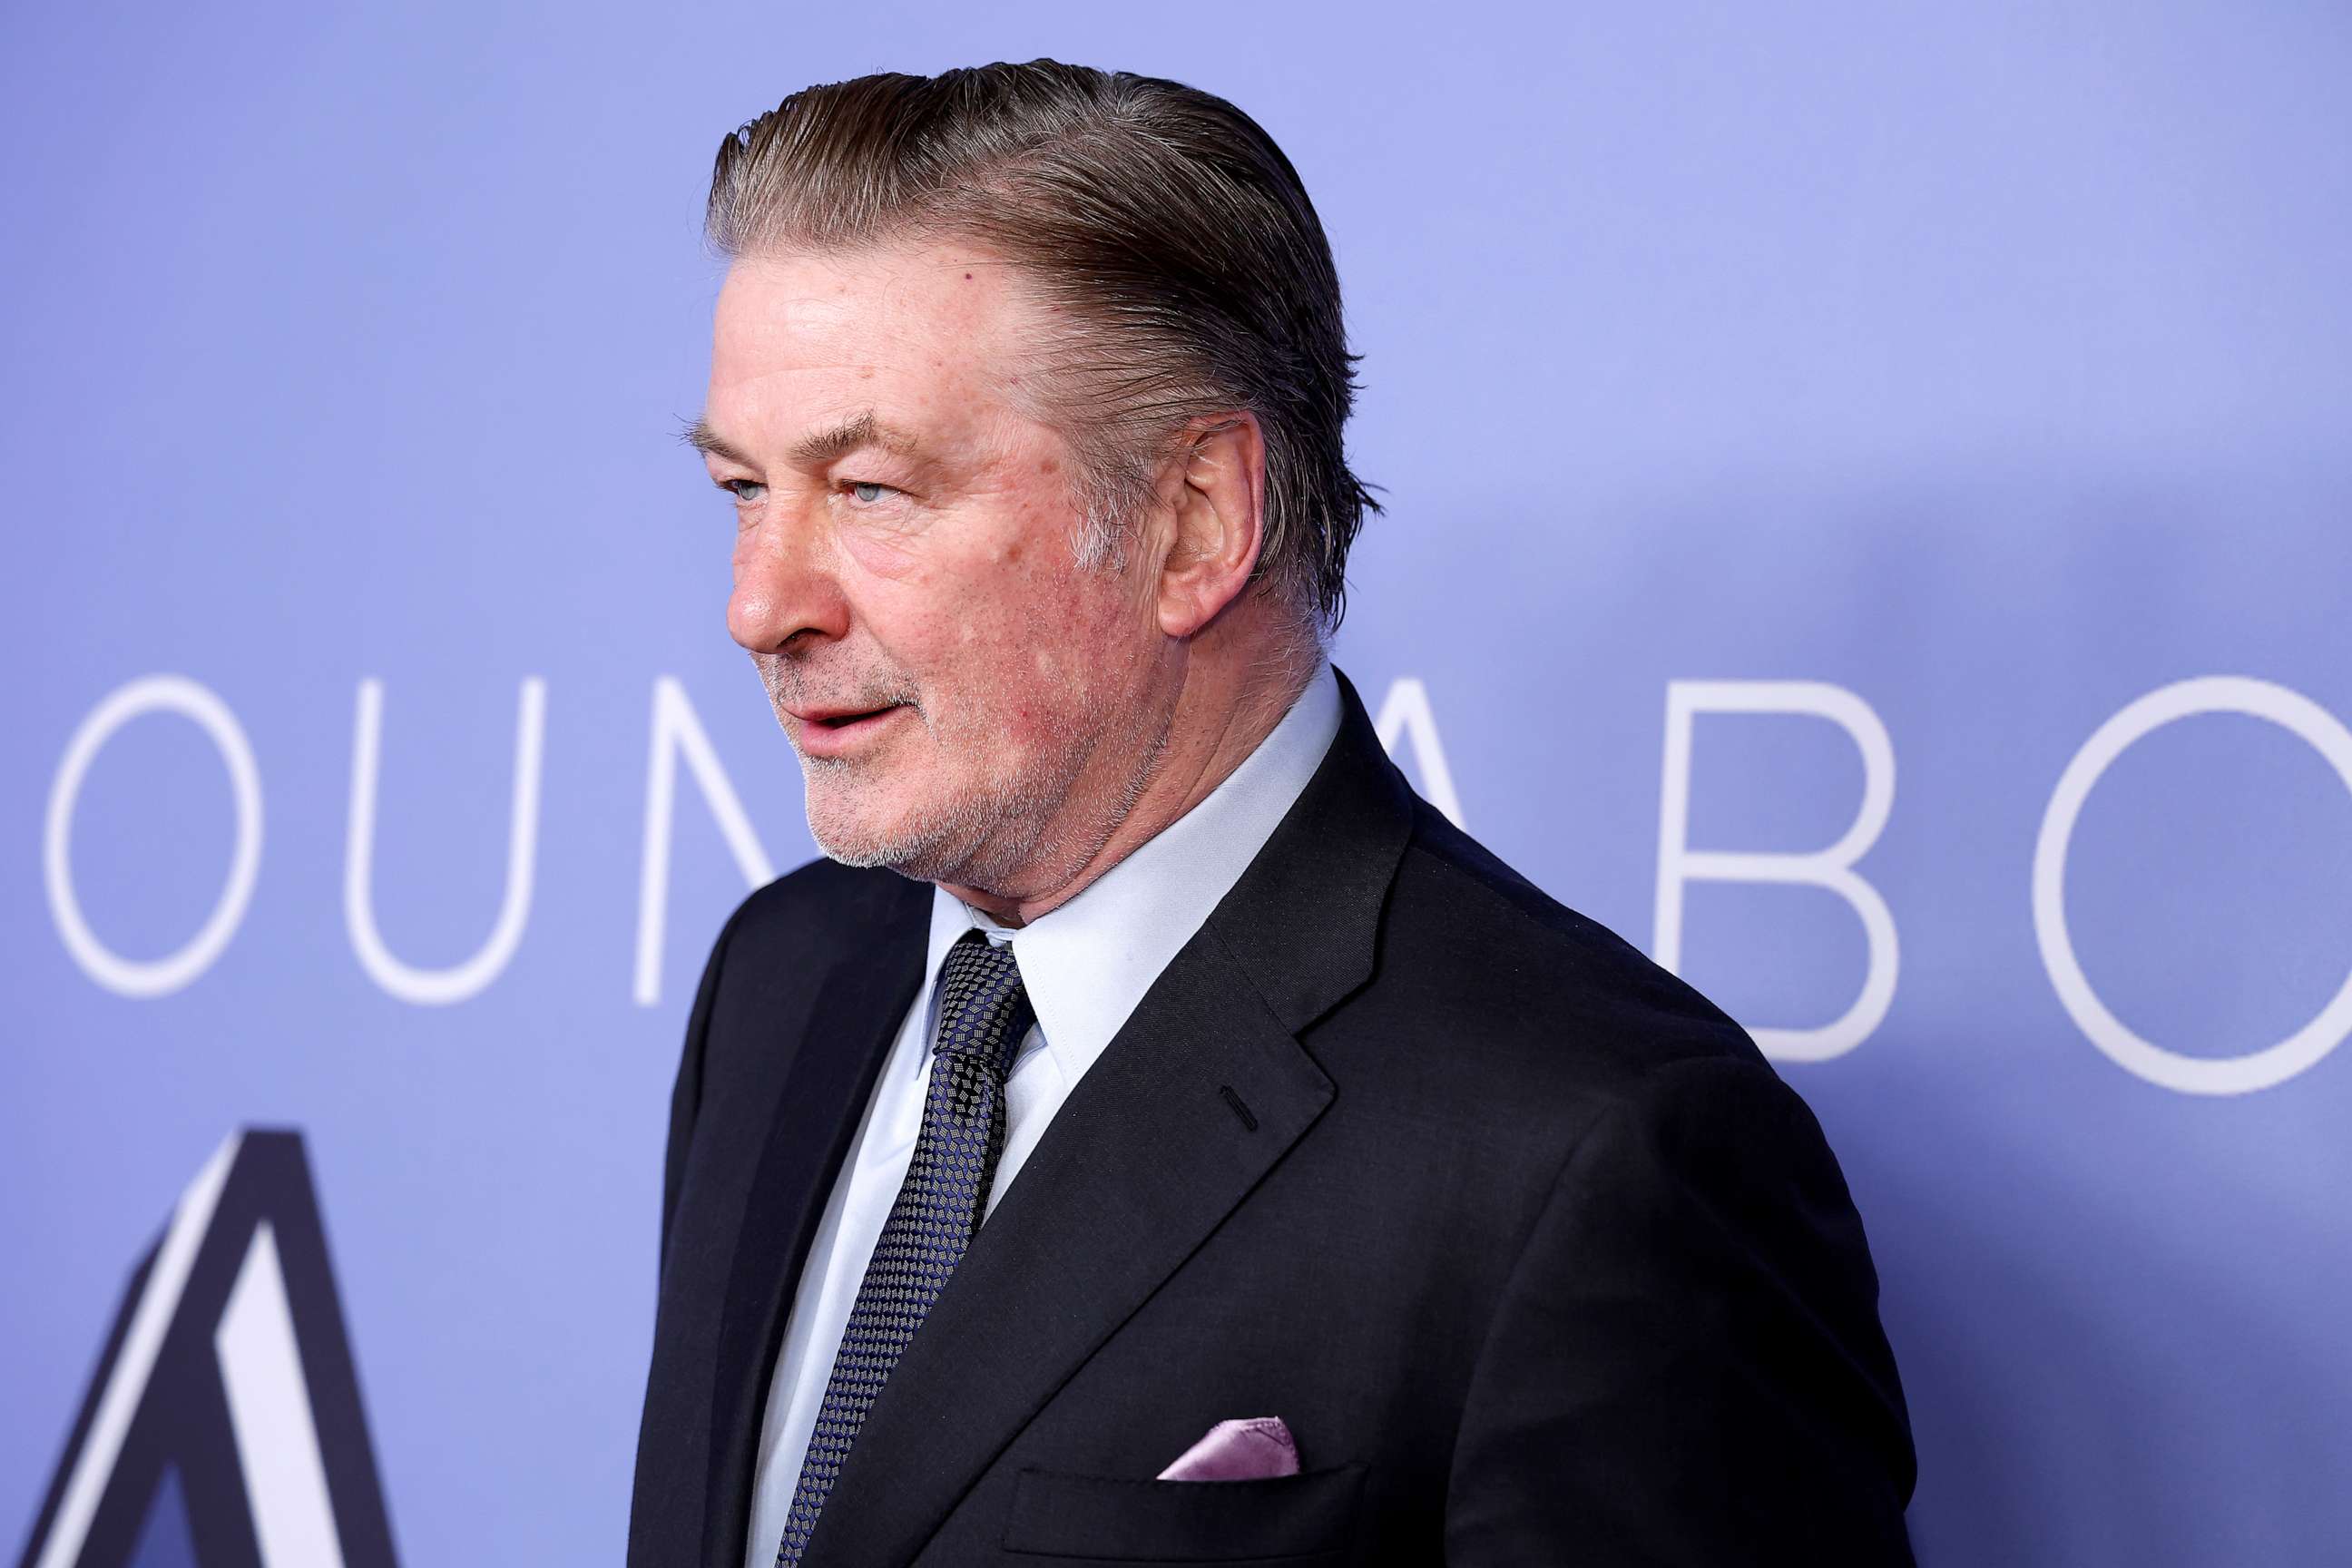 PHOTO: Alec Baldwin attends The Roundabout Gala 2023 at The Ziegfeld Ballroom on March 06, 2023 in New York City.